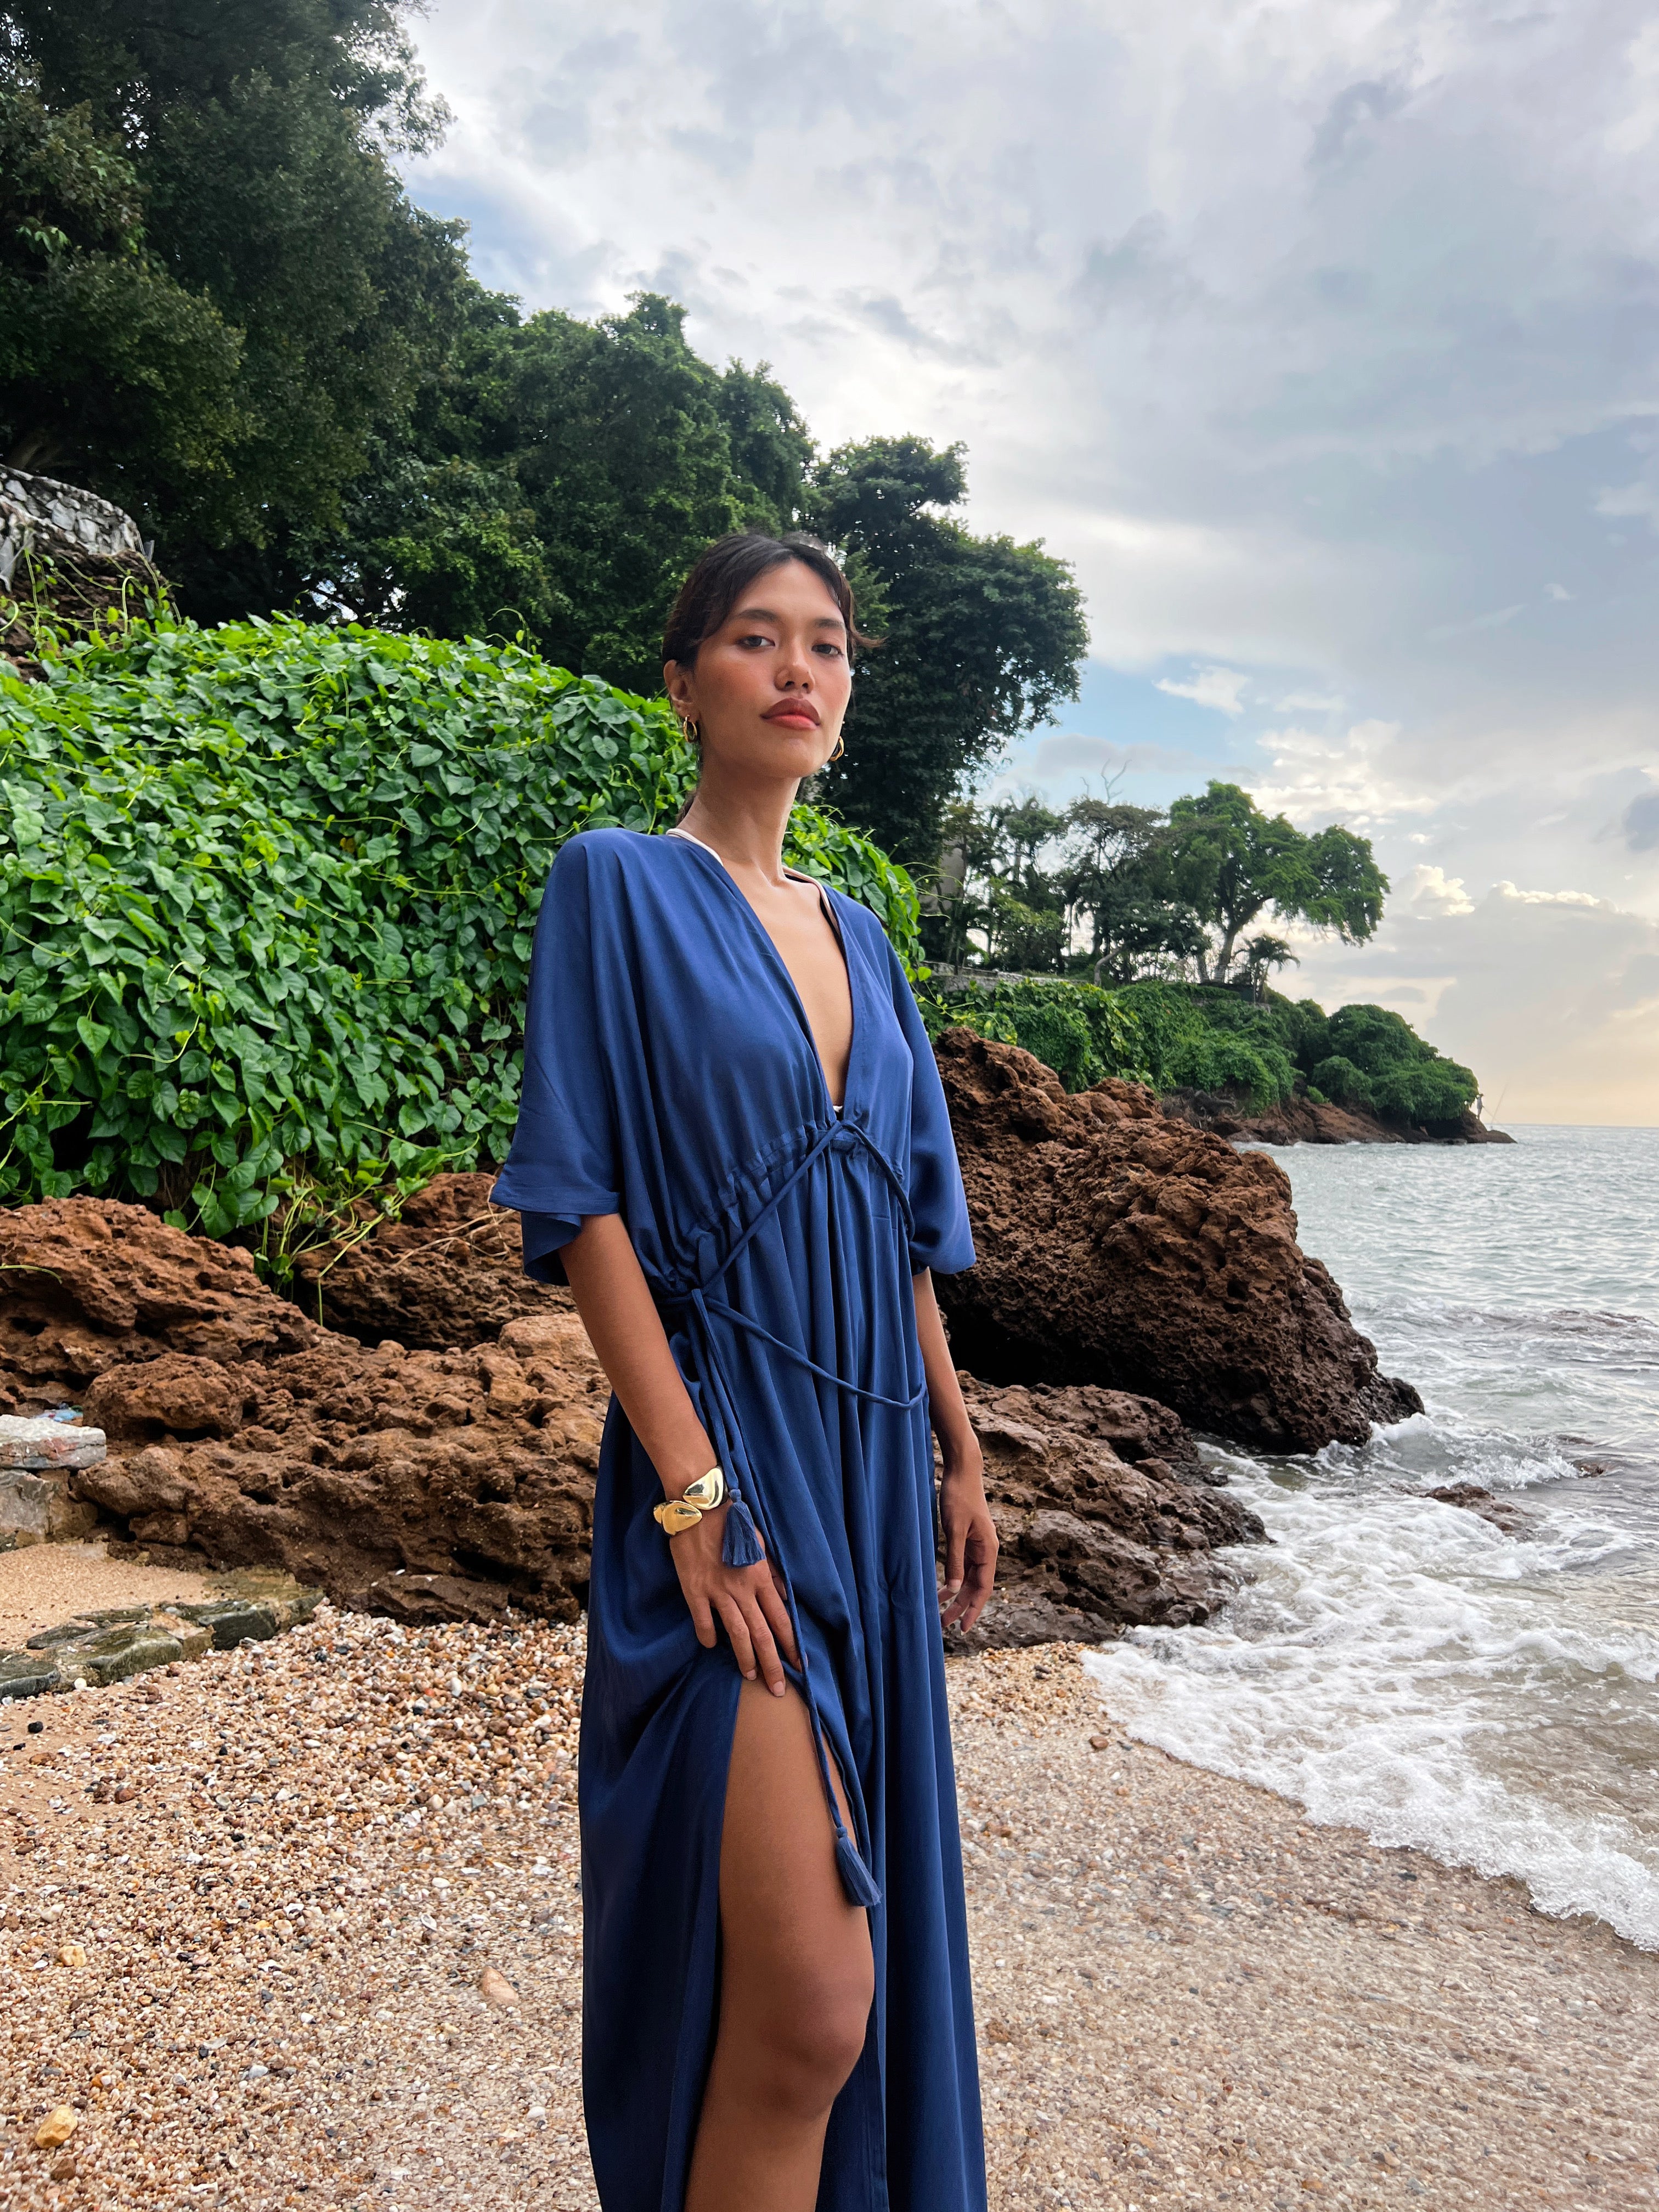 Shop comfort and elegance with our Goddess Kaftan Maxi Dress. This navy hand-dyed kaftan features a flowy, silky feel and a V-neck, making it the ideal choice for resort wear or vacation wear.